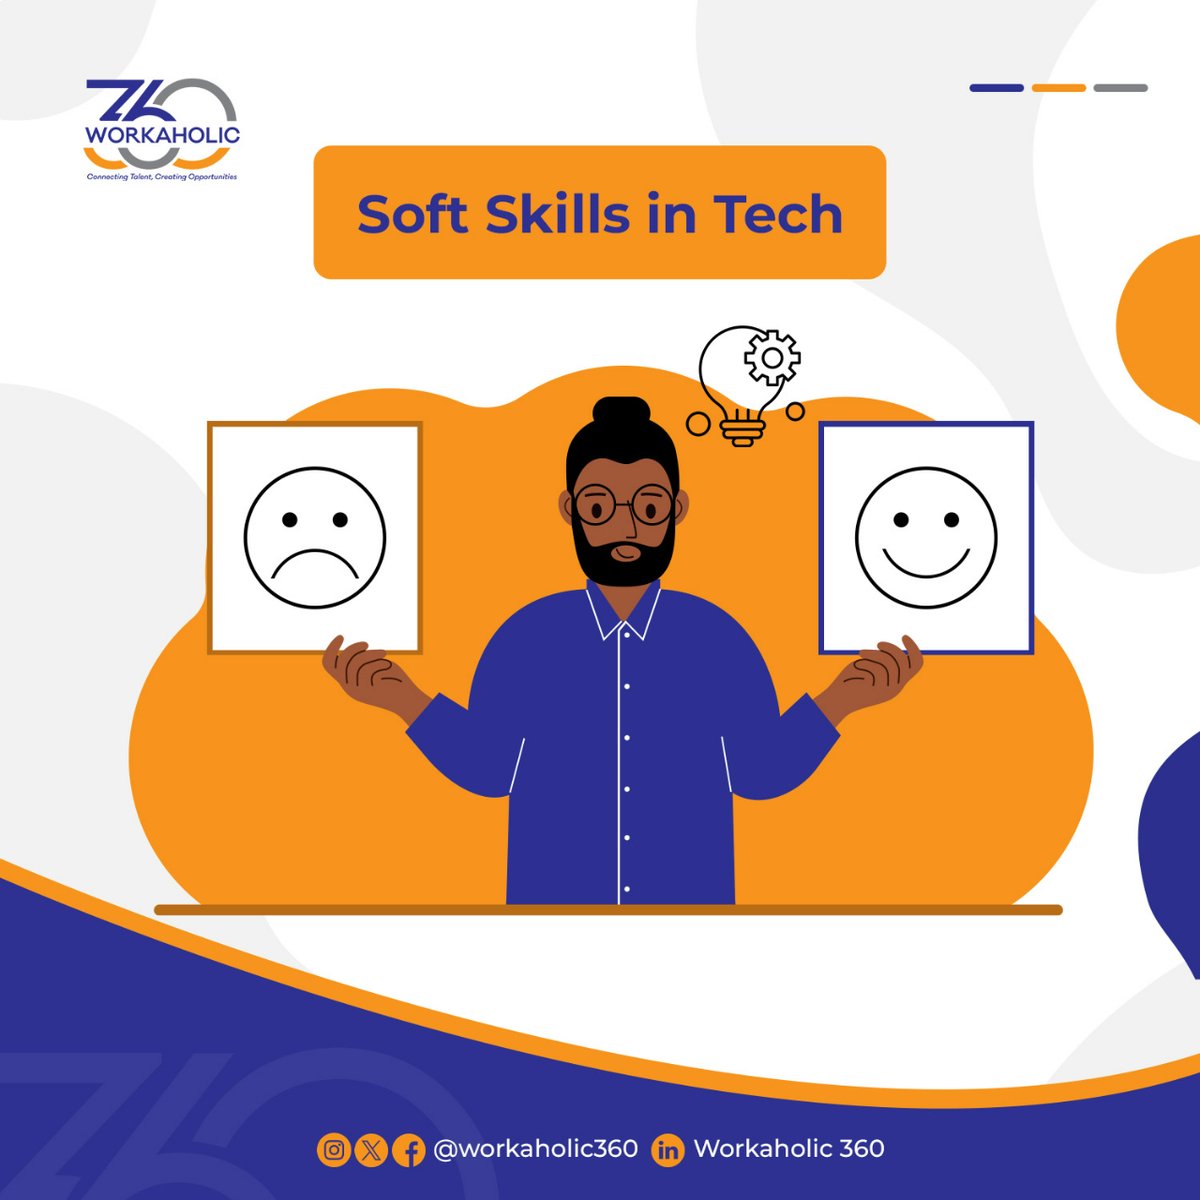 Technical skills are essential, but soft skills differentiate top performers. Workaholic360 recognizes this and can prioritize candidates who not only fit technically but also culturally and interpersonally.
#SoftSkills #TechCareers #CareerGrowth #TechJobs